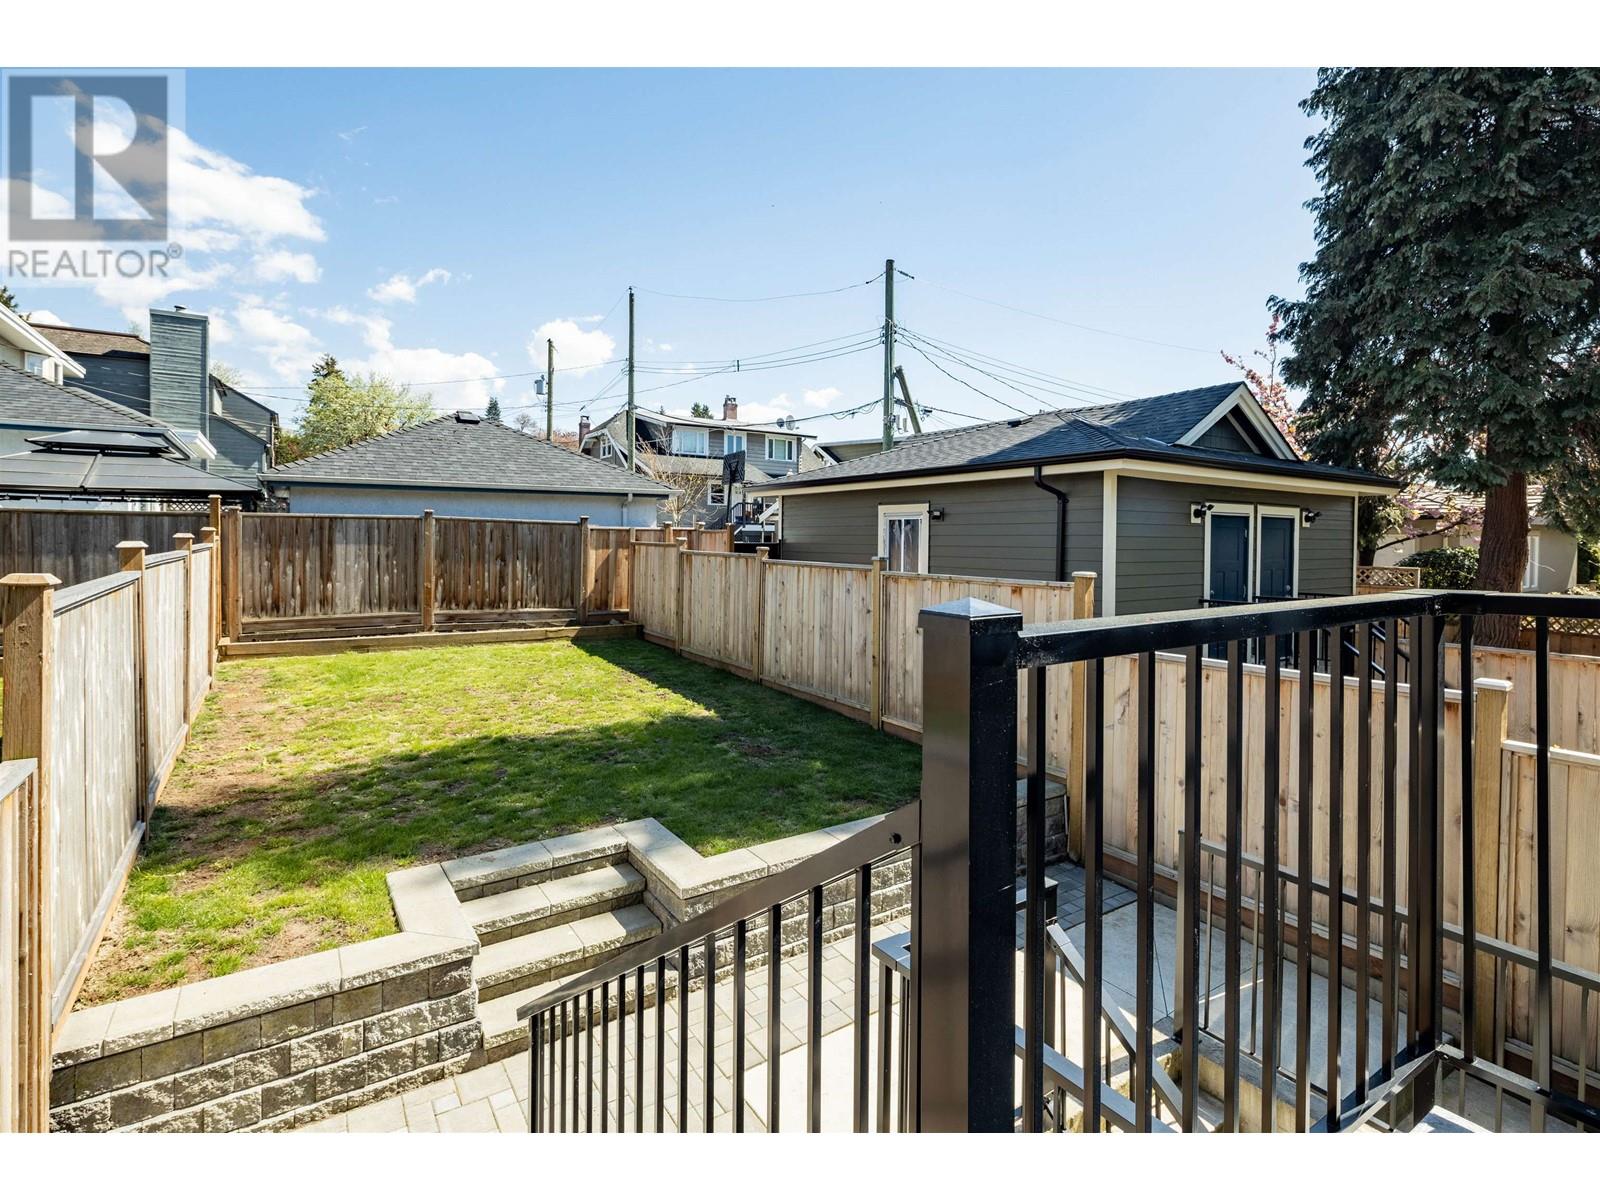 Listing Picture 6 of 37 : 6524 ANGUS DRIVE, Vancouver / 溫哥華 - 魯藝地產 Yvonne Lu Group - MLS Medallion Club Member